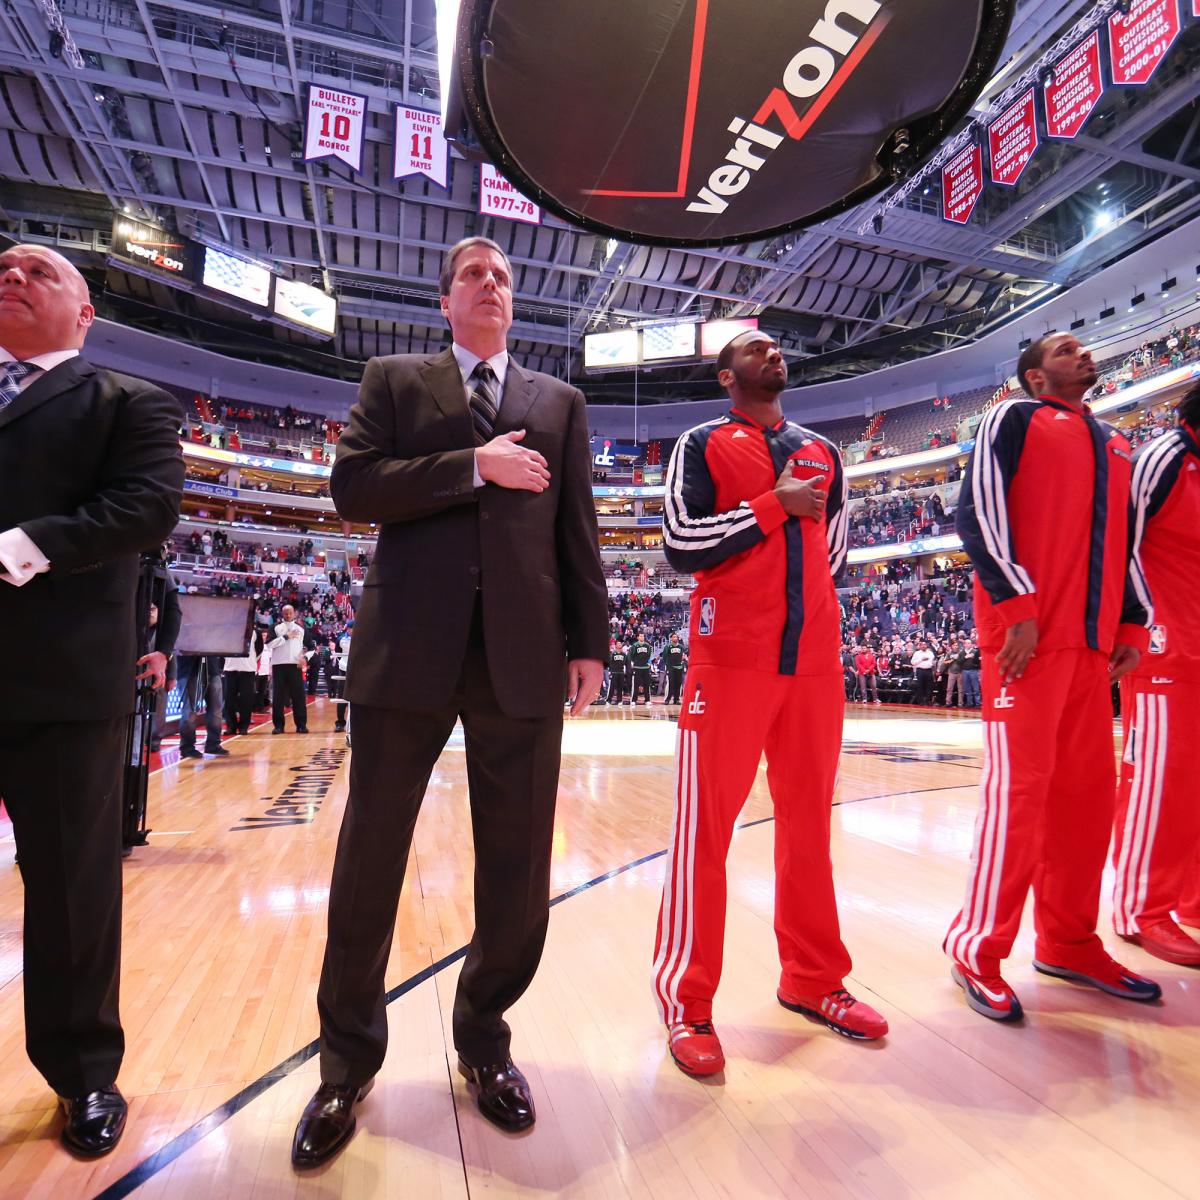 What We Learned About Washington Wizards During Season's 1st Half